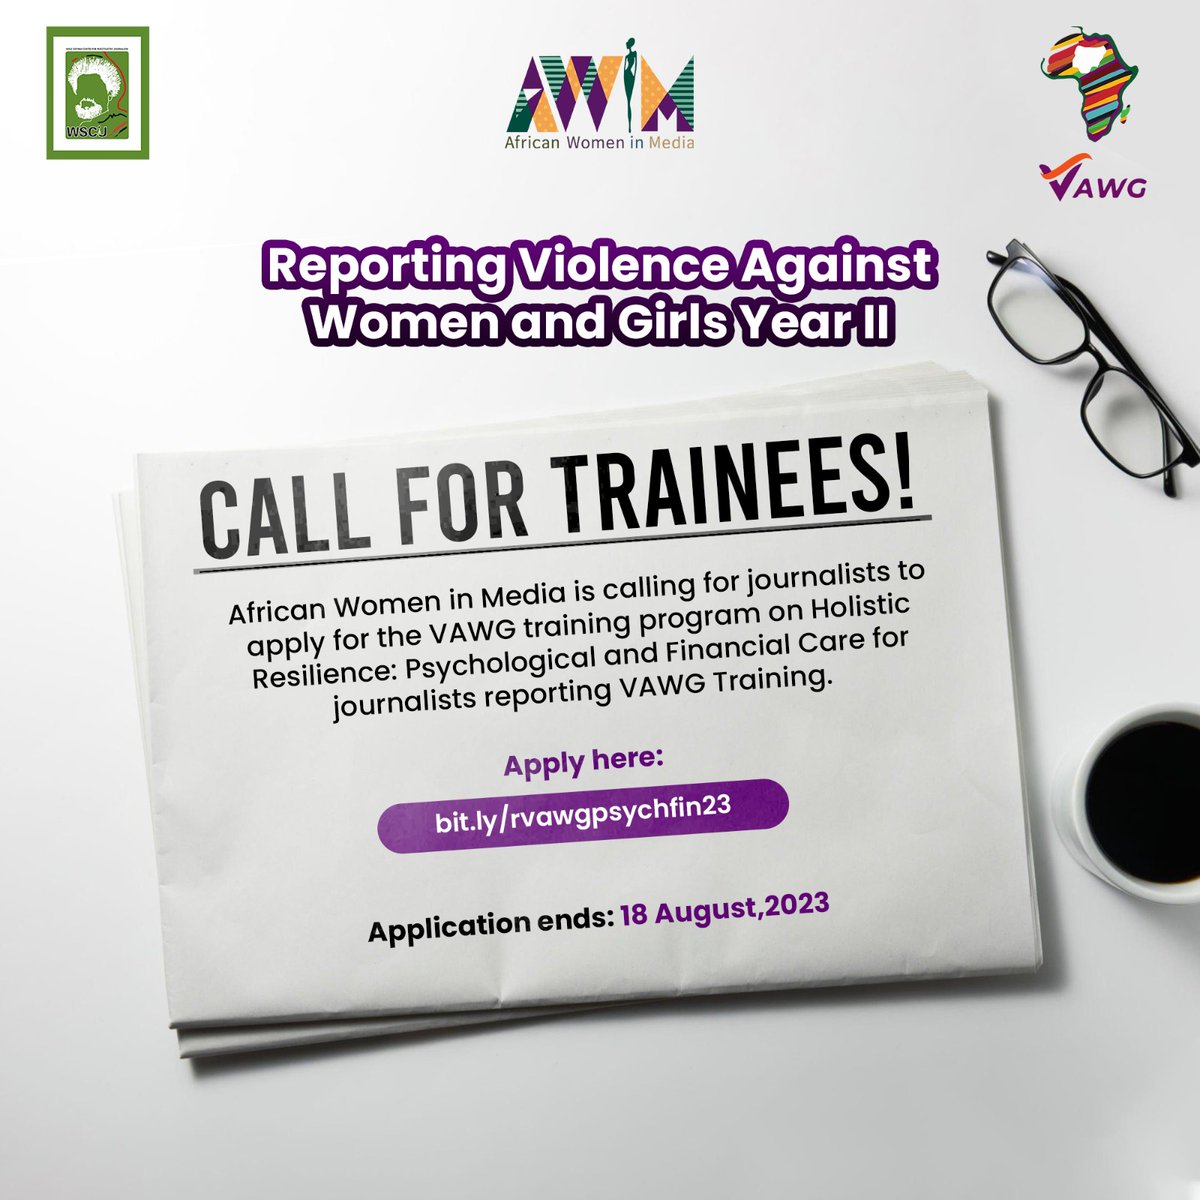 We are now inviting journalists to apply for the VAWG training program on Psychological and Financial Care for journalists reporting VAWG. The training will focus on tools and techniques for psychological and financial resilience, self-care practices, developing and implementing…